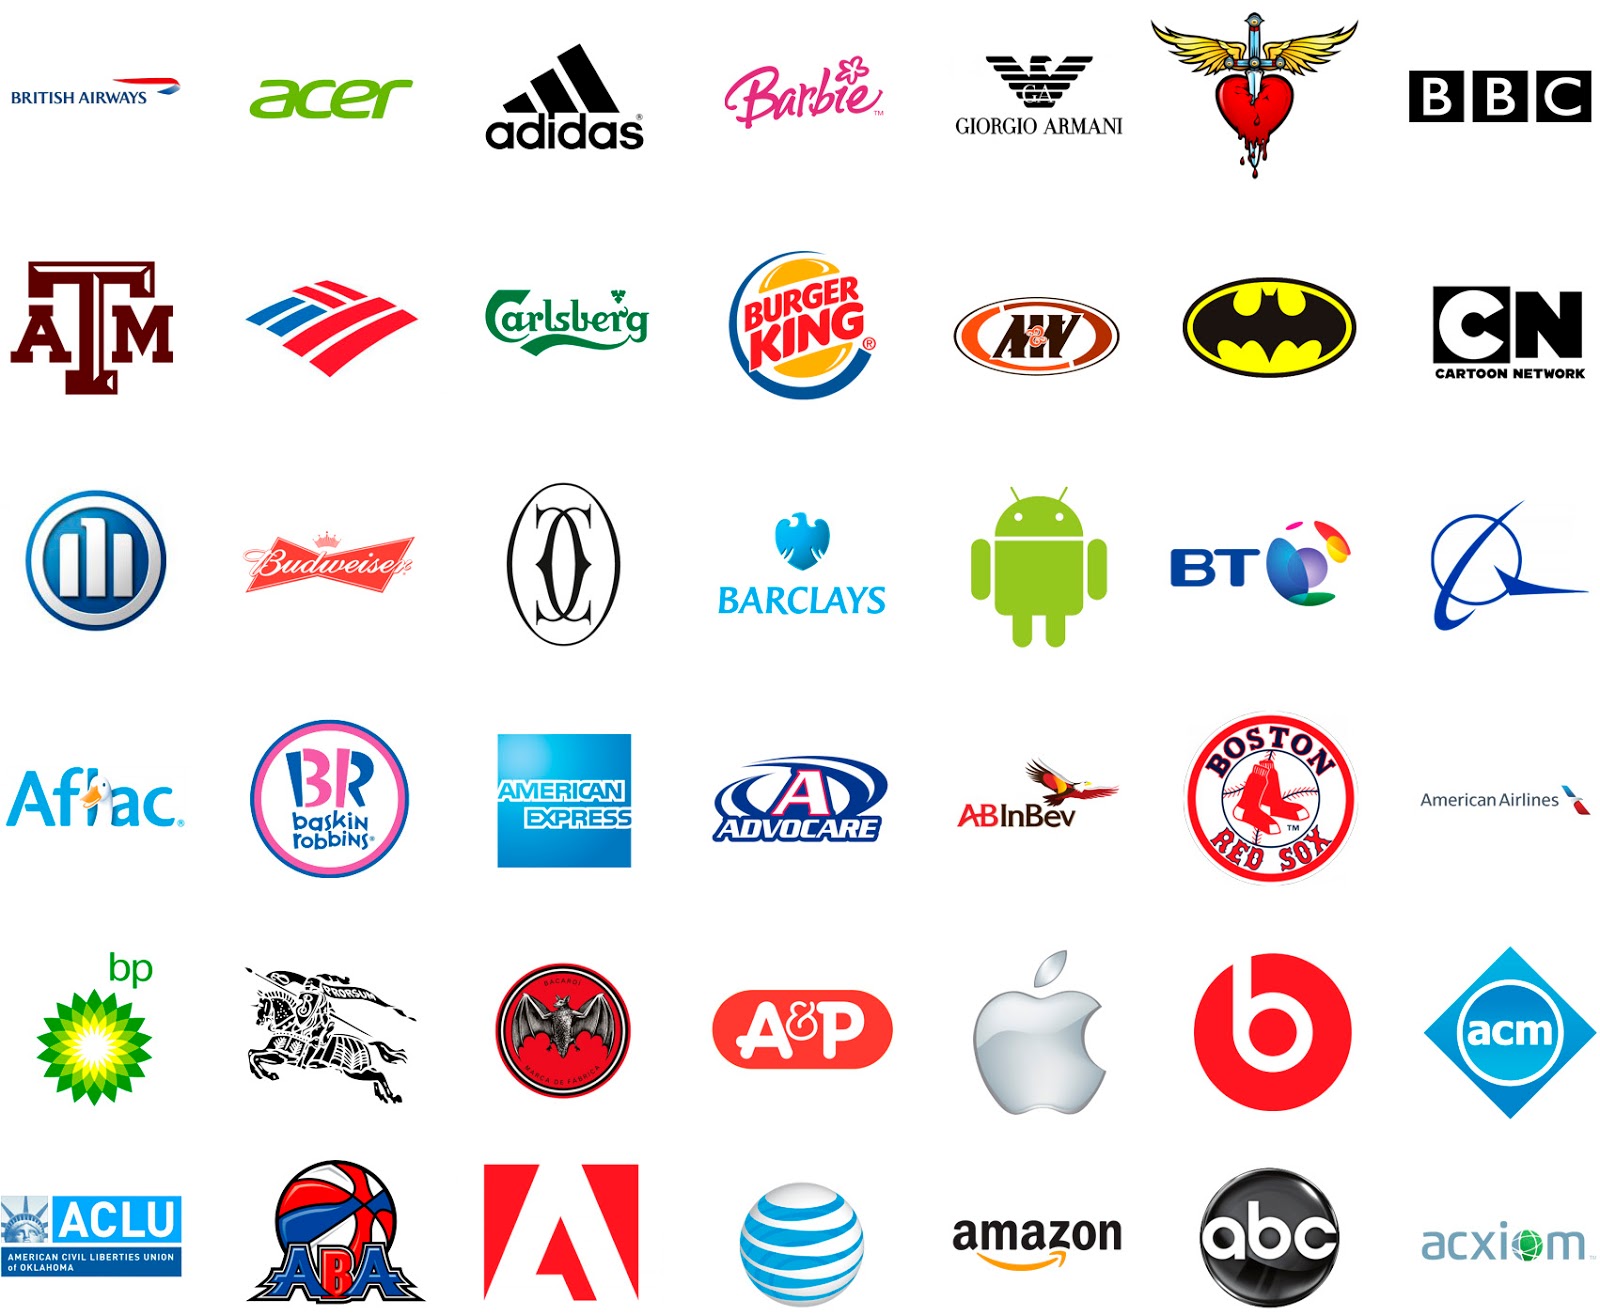 Famous Logos | All Logo Pictures